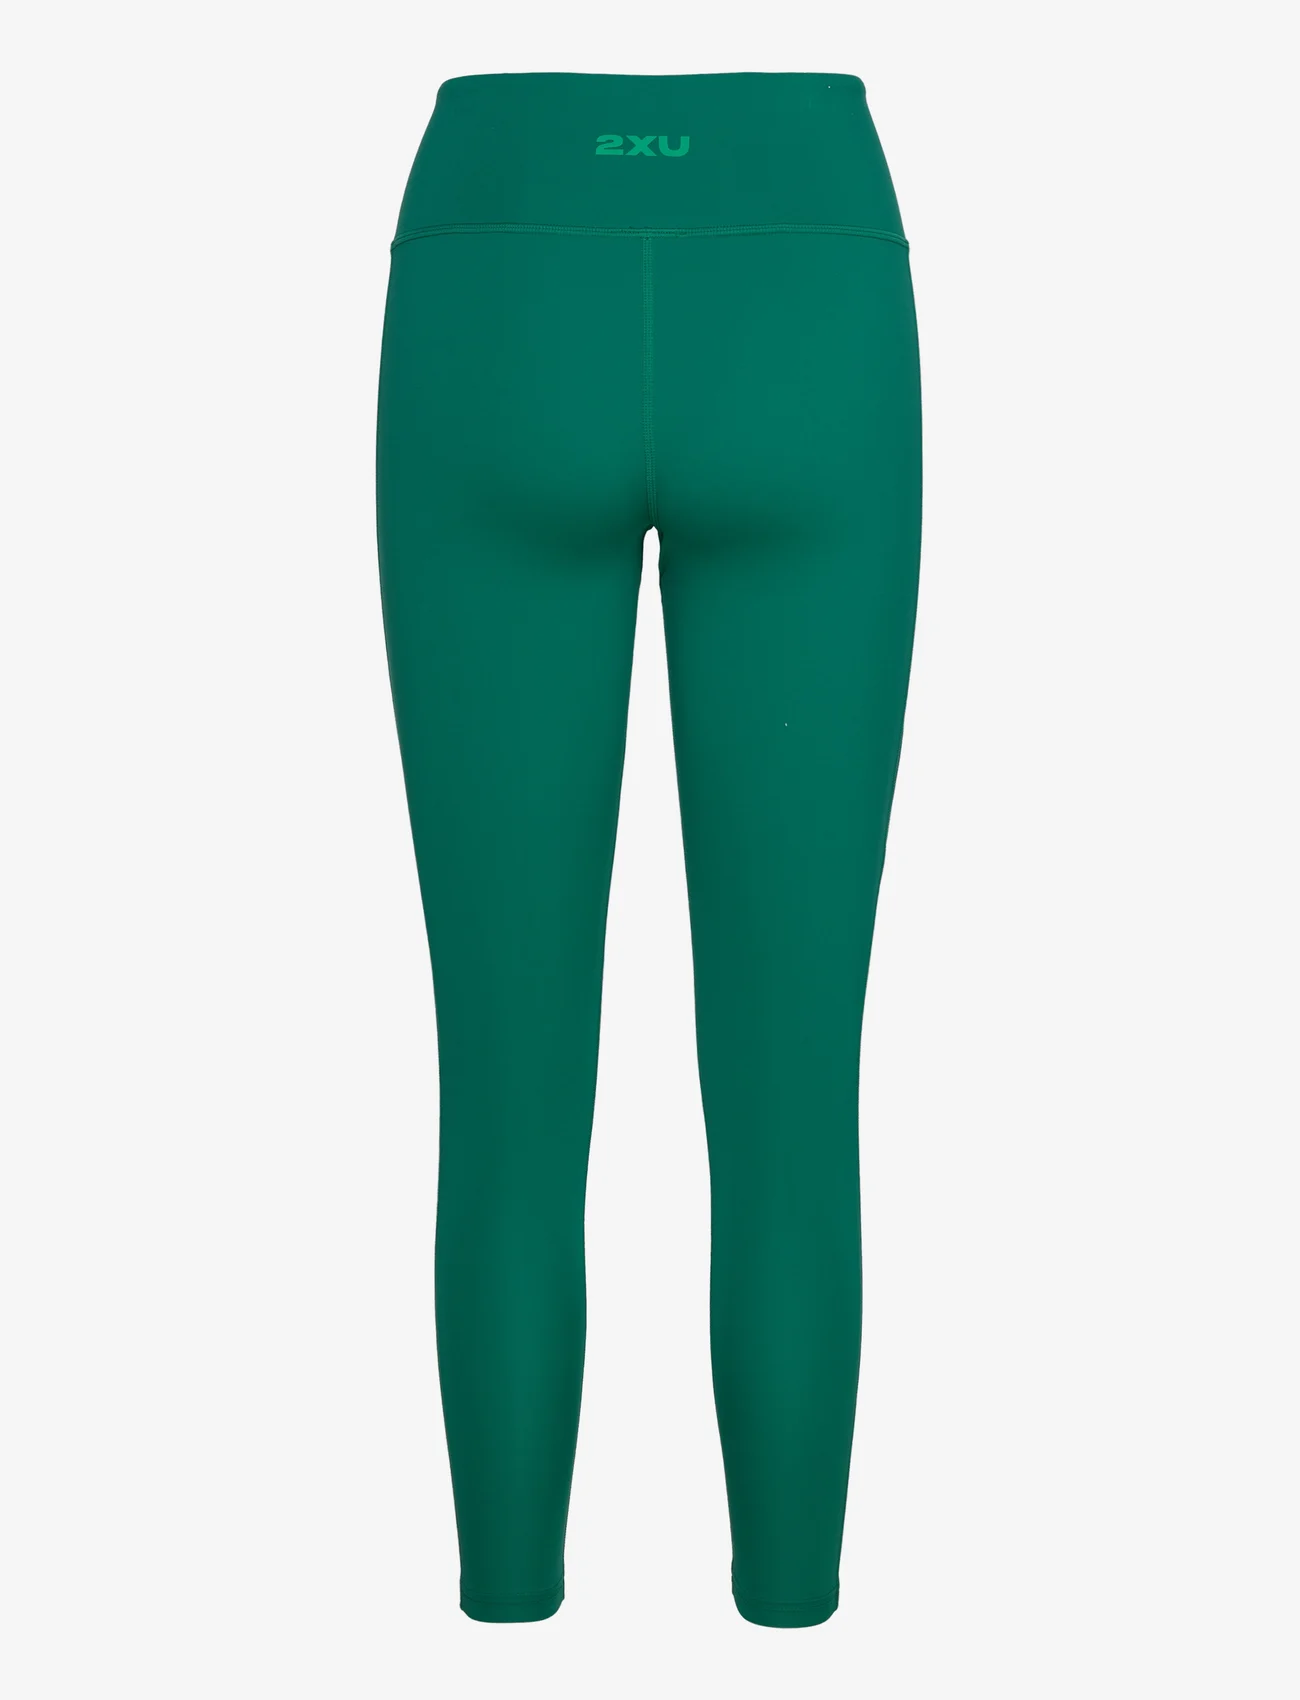 2XU - FORM HI-RISE COMP TIGHTS - sportleggings - forest green/forest green - 1